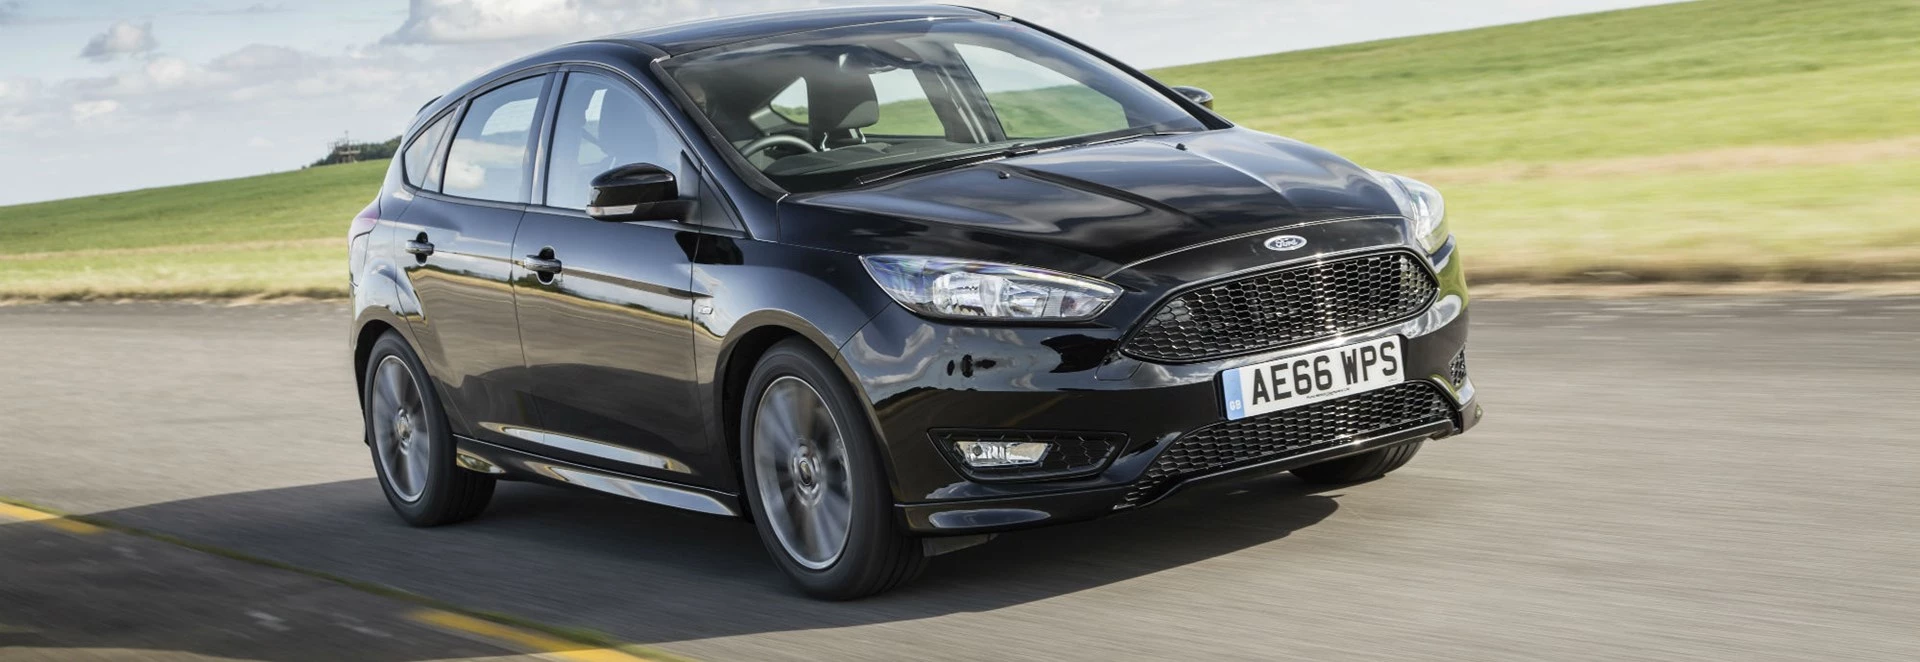 The Ford Focus Isn't Dead Yet, But the Future Isn't Looking Too Hot